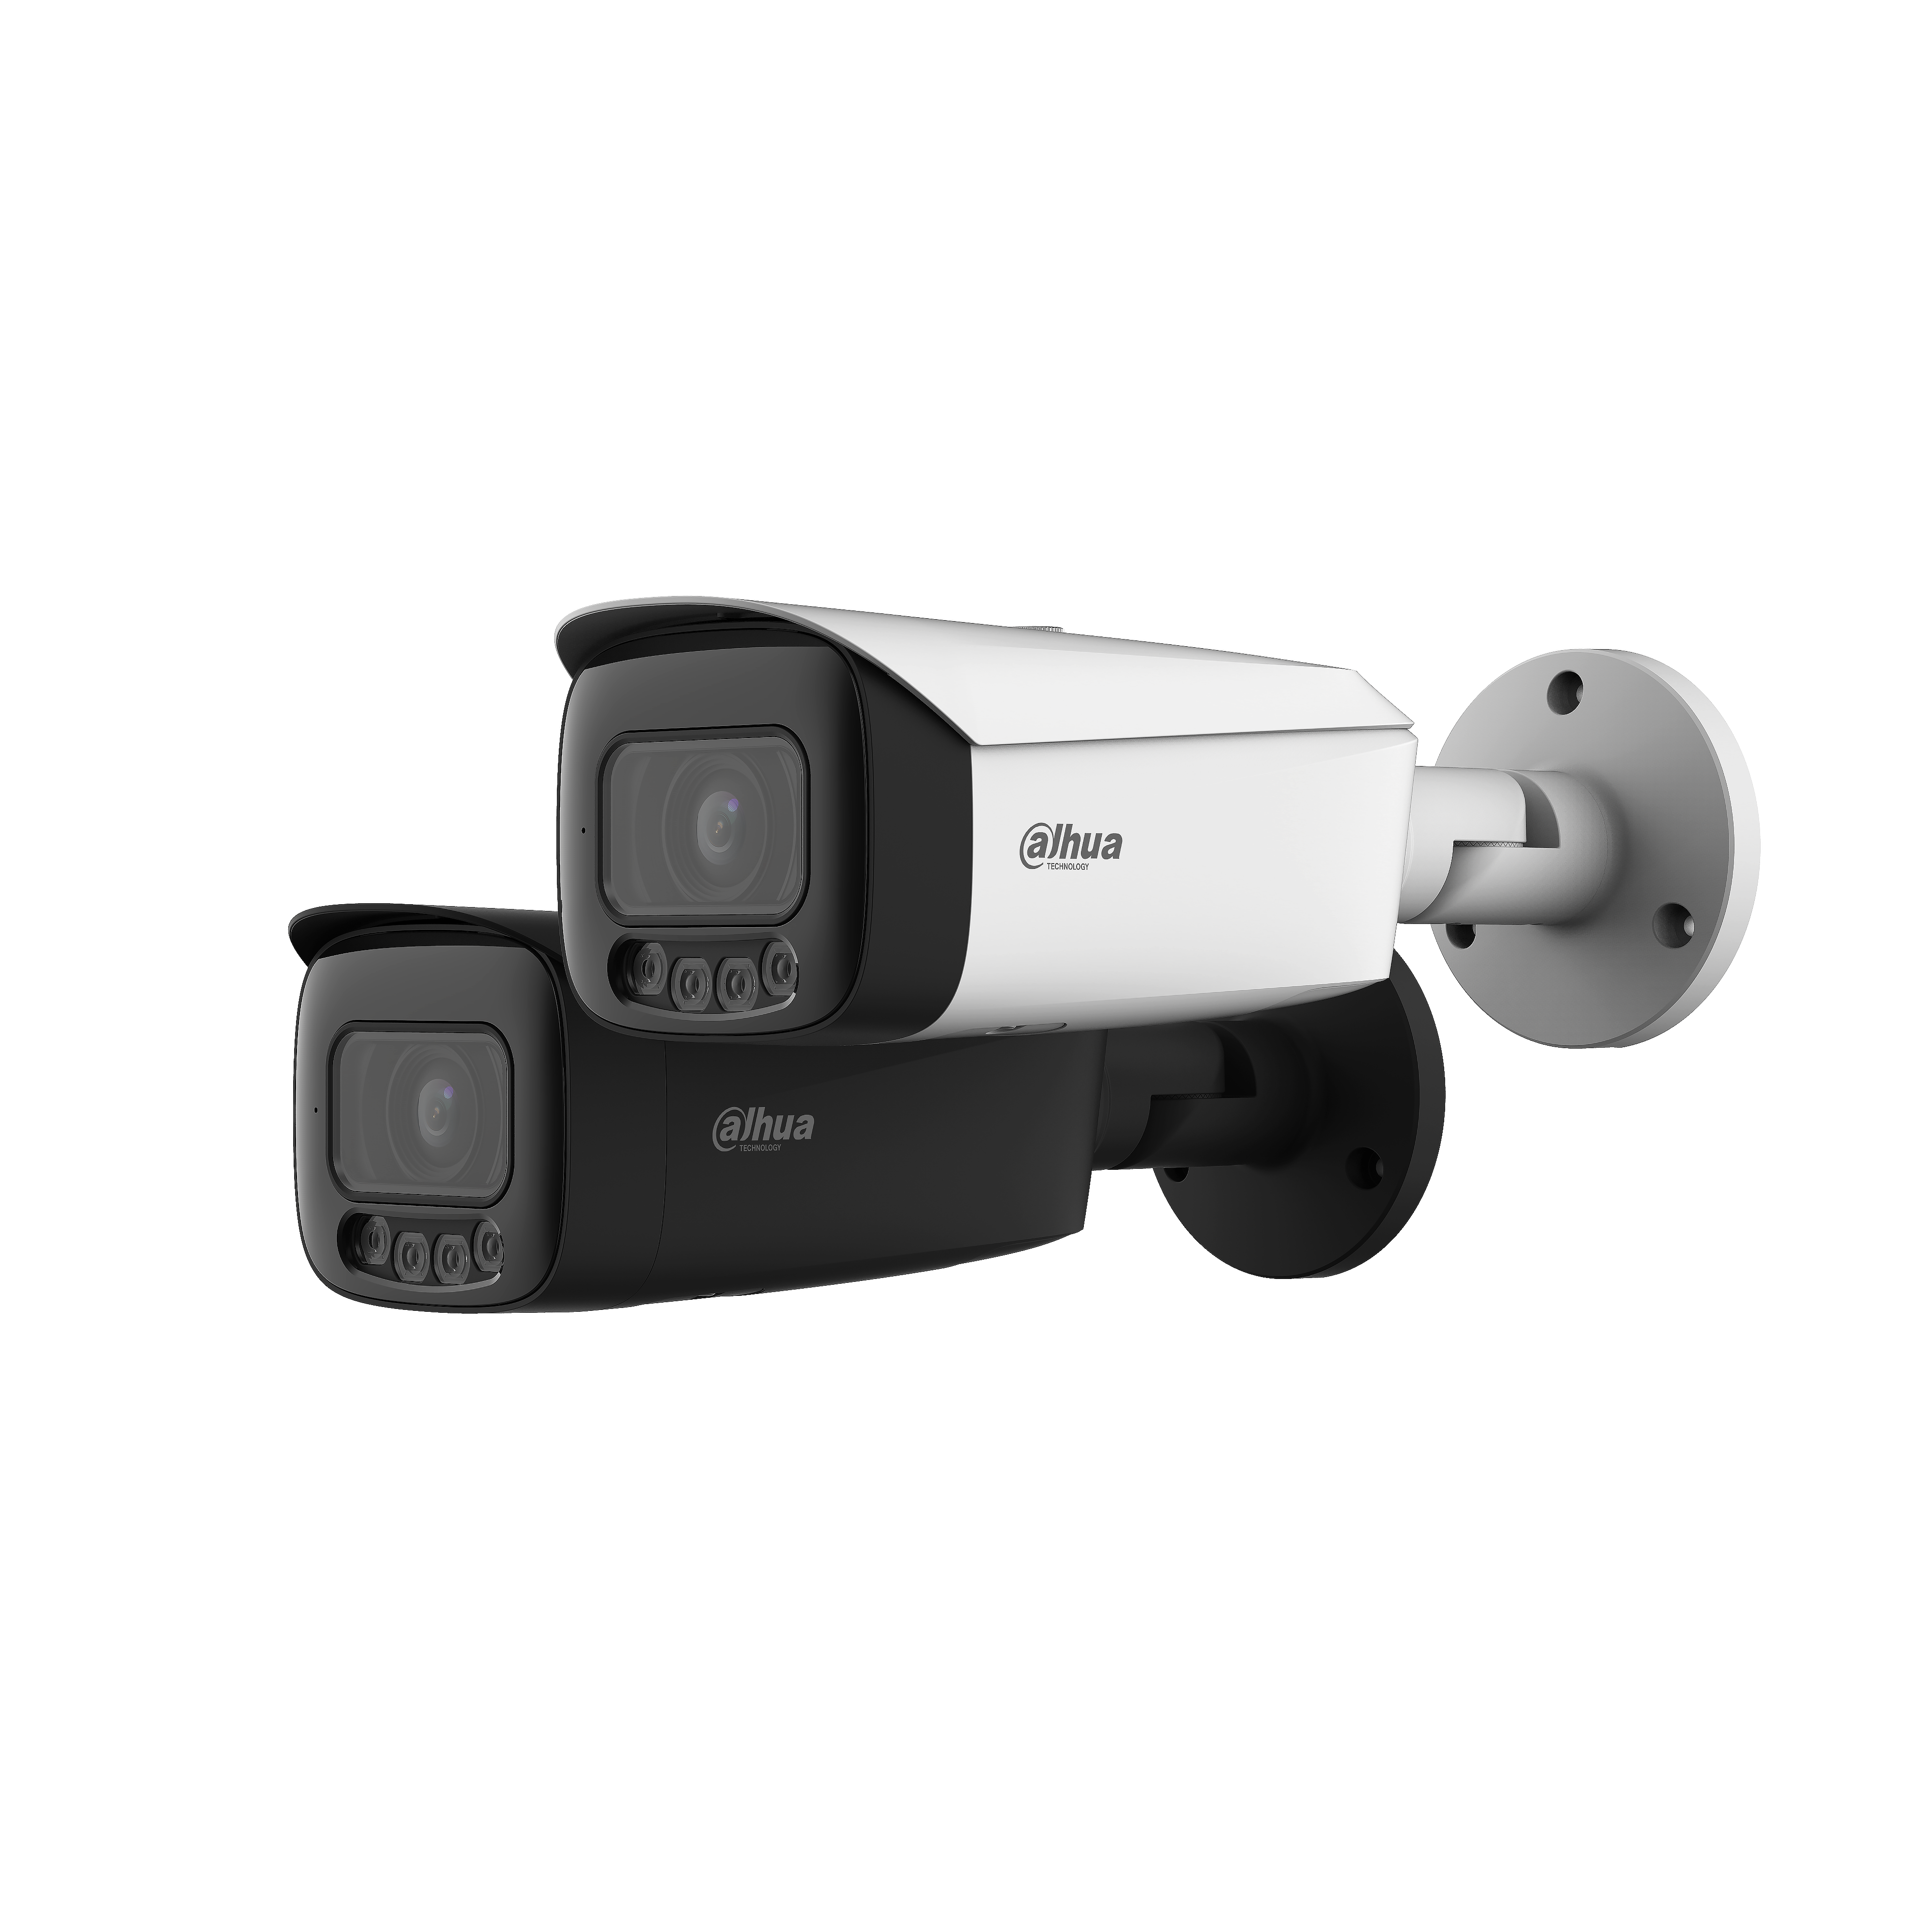 IPC-HFW5849T1P-ASE-LED - Dahua - 8MP Full-color Fixed-focal Warm LED Bullet WizMind Network Camera - 0